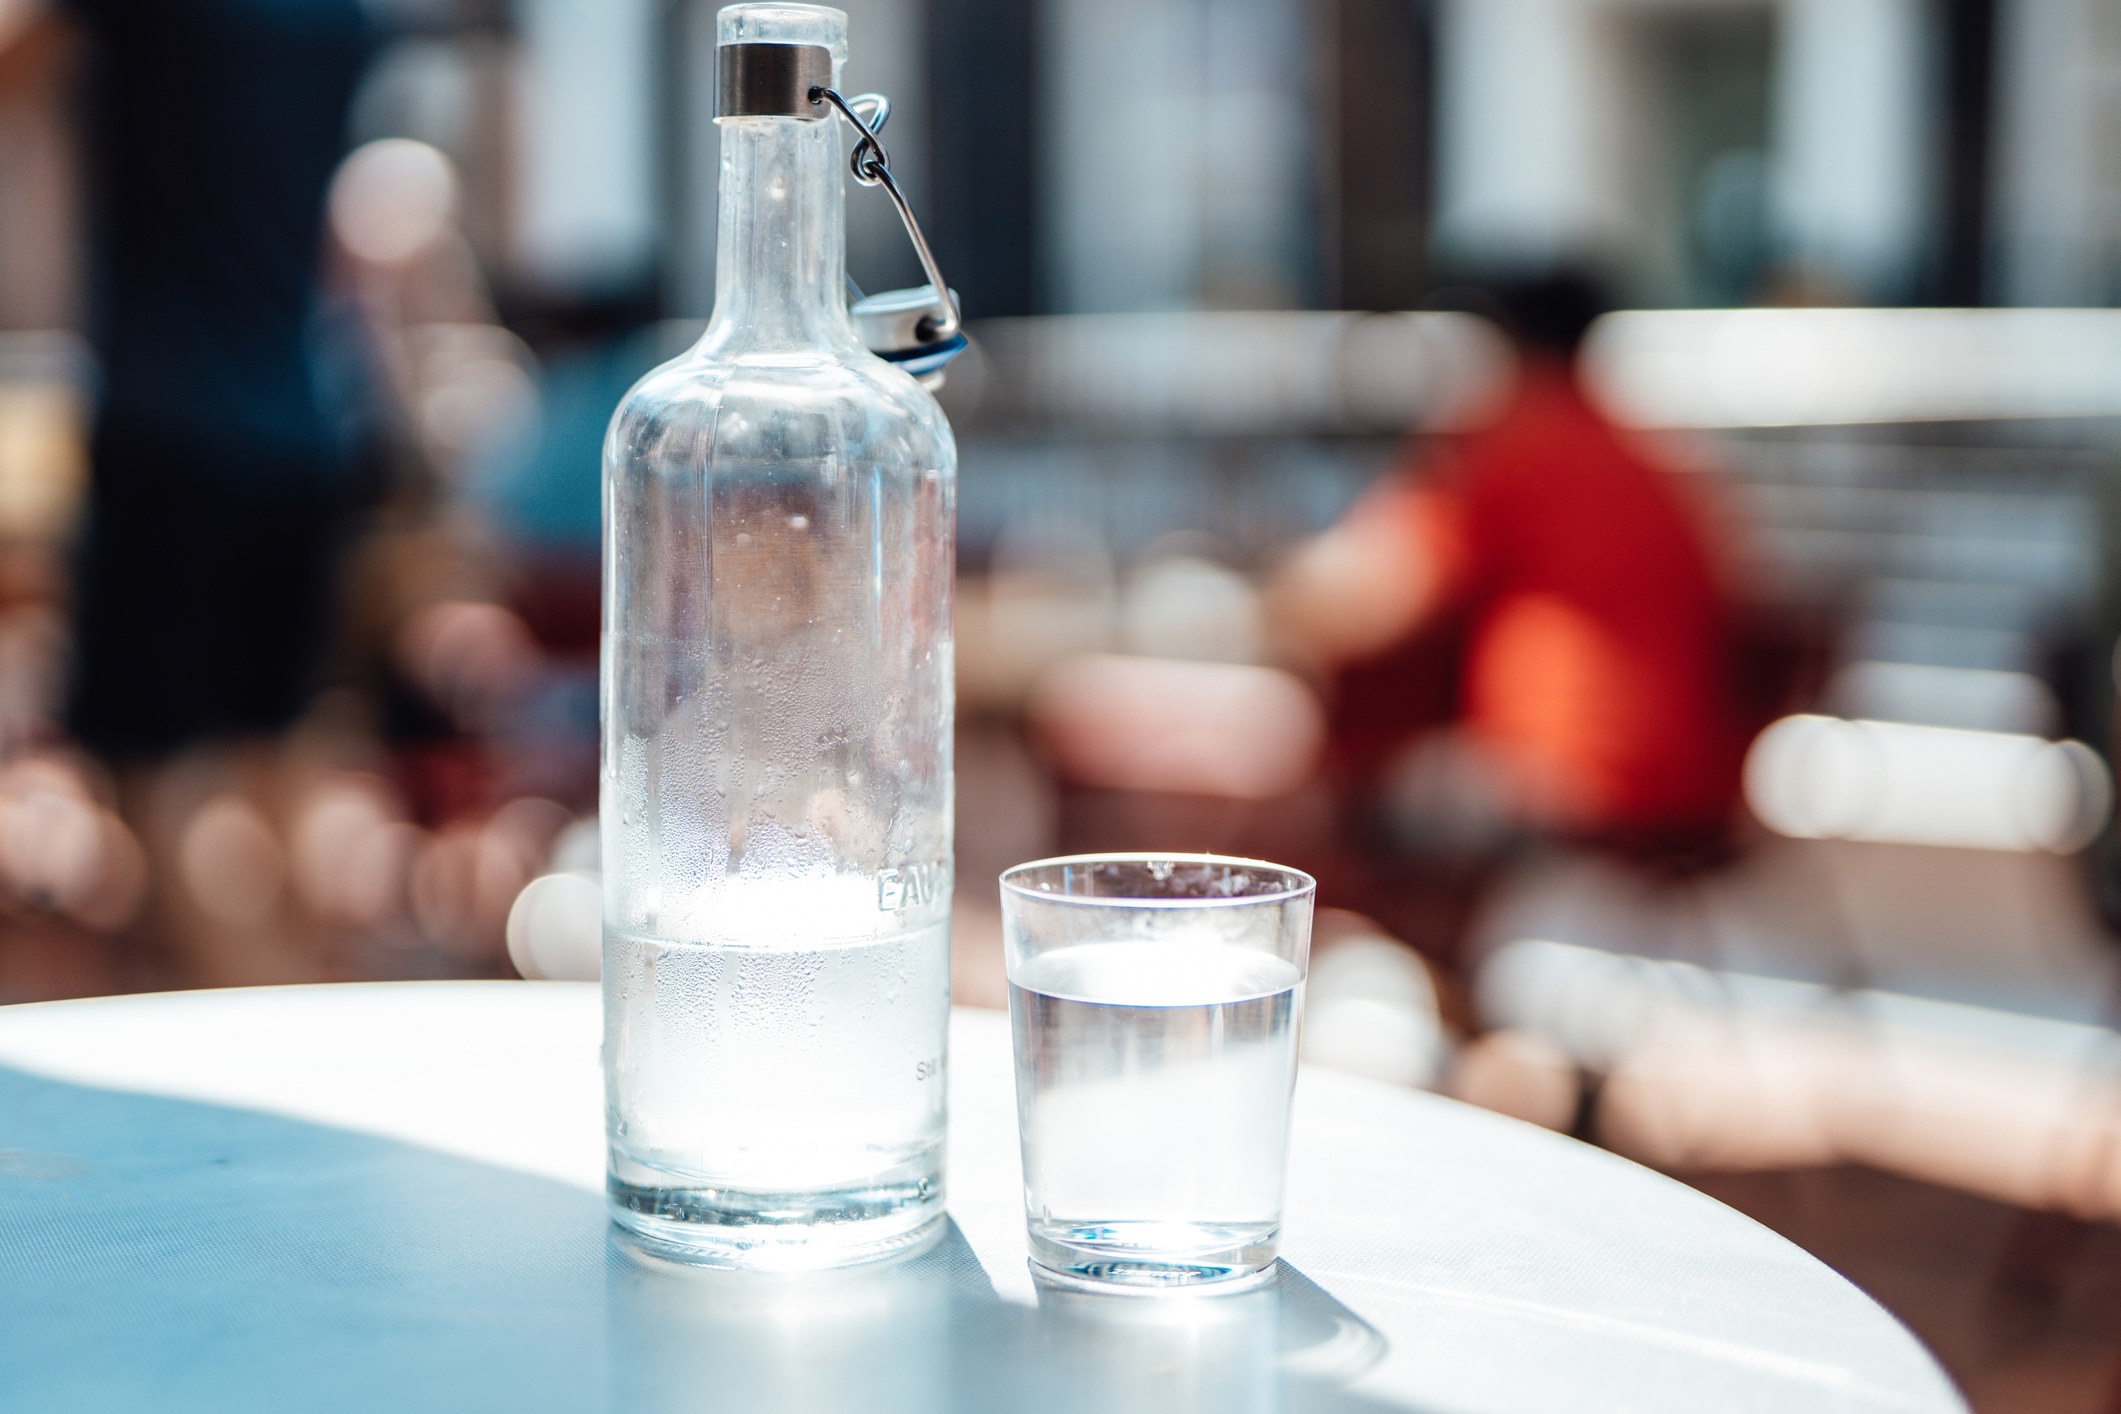 A carafe and a glass of water on a table.